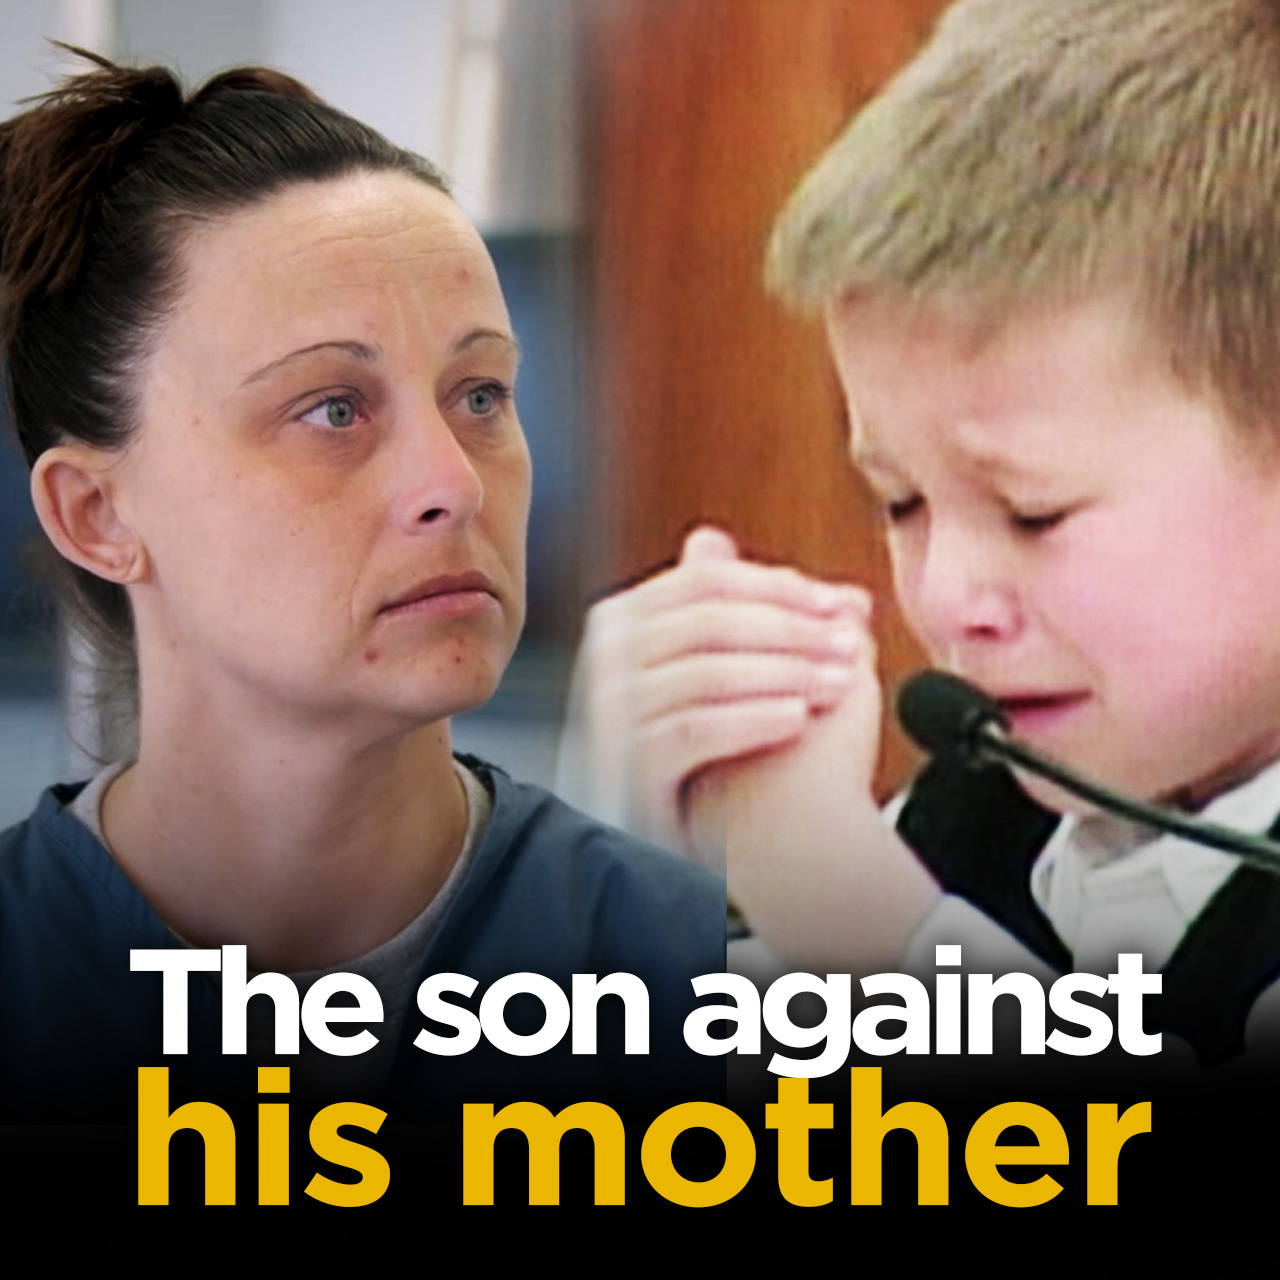 A six year old child forced to testify against his own mother | Adriana Hutto Case